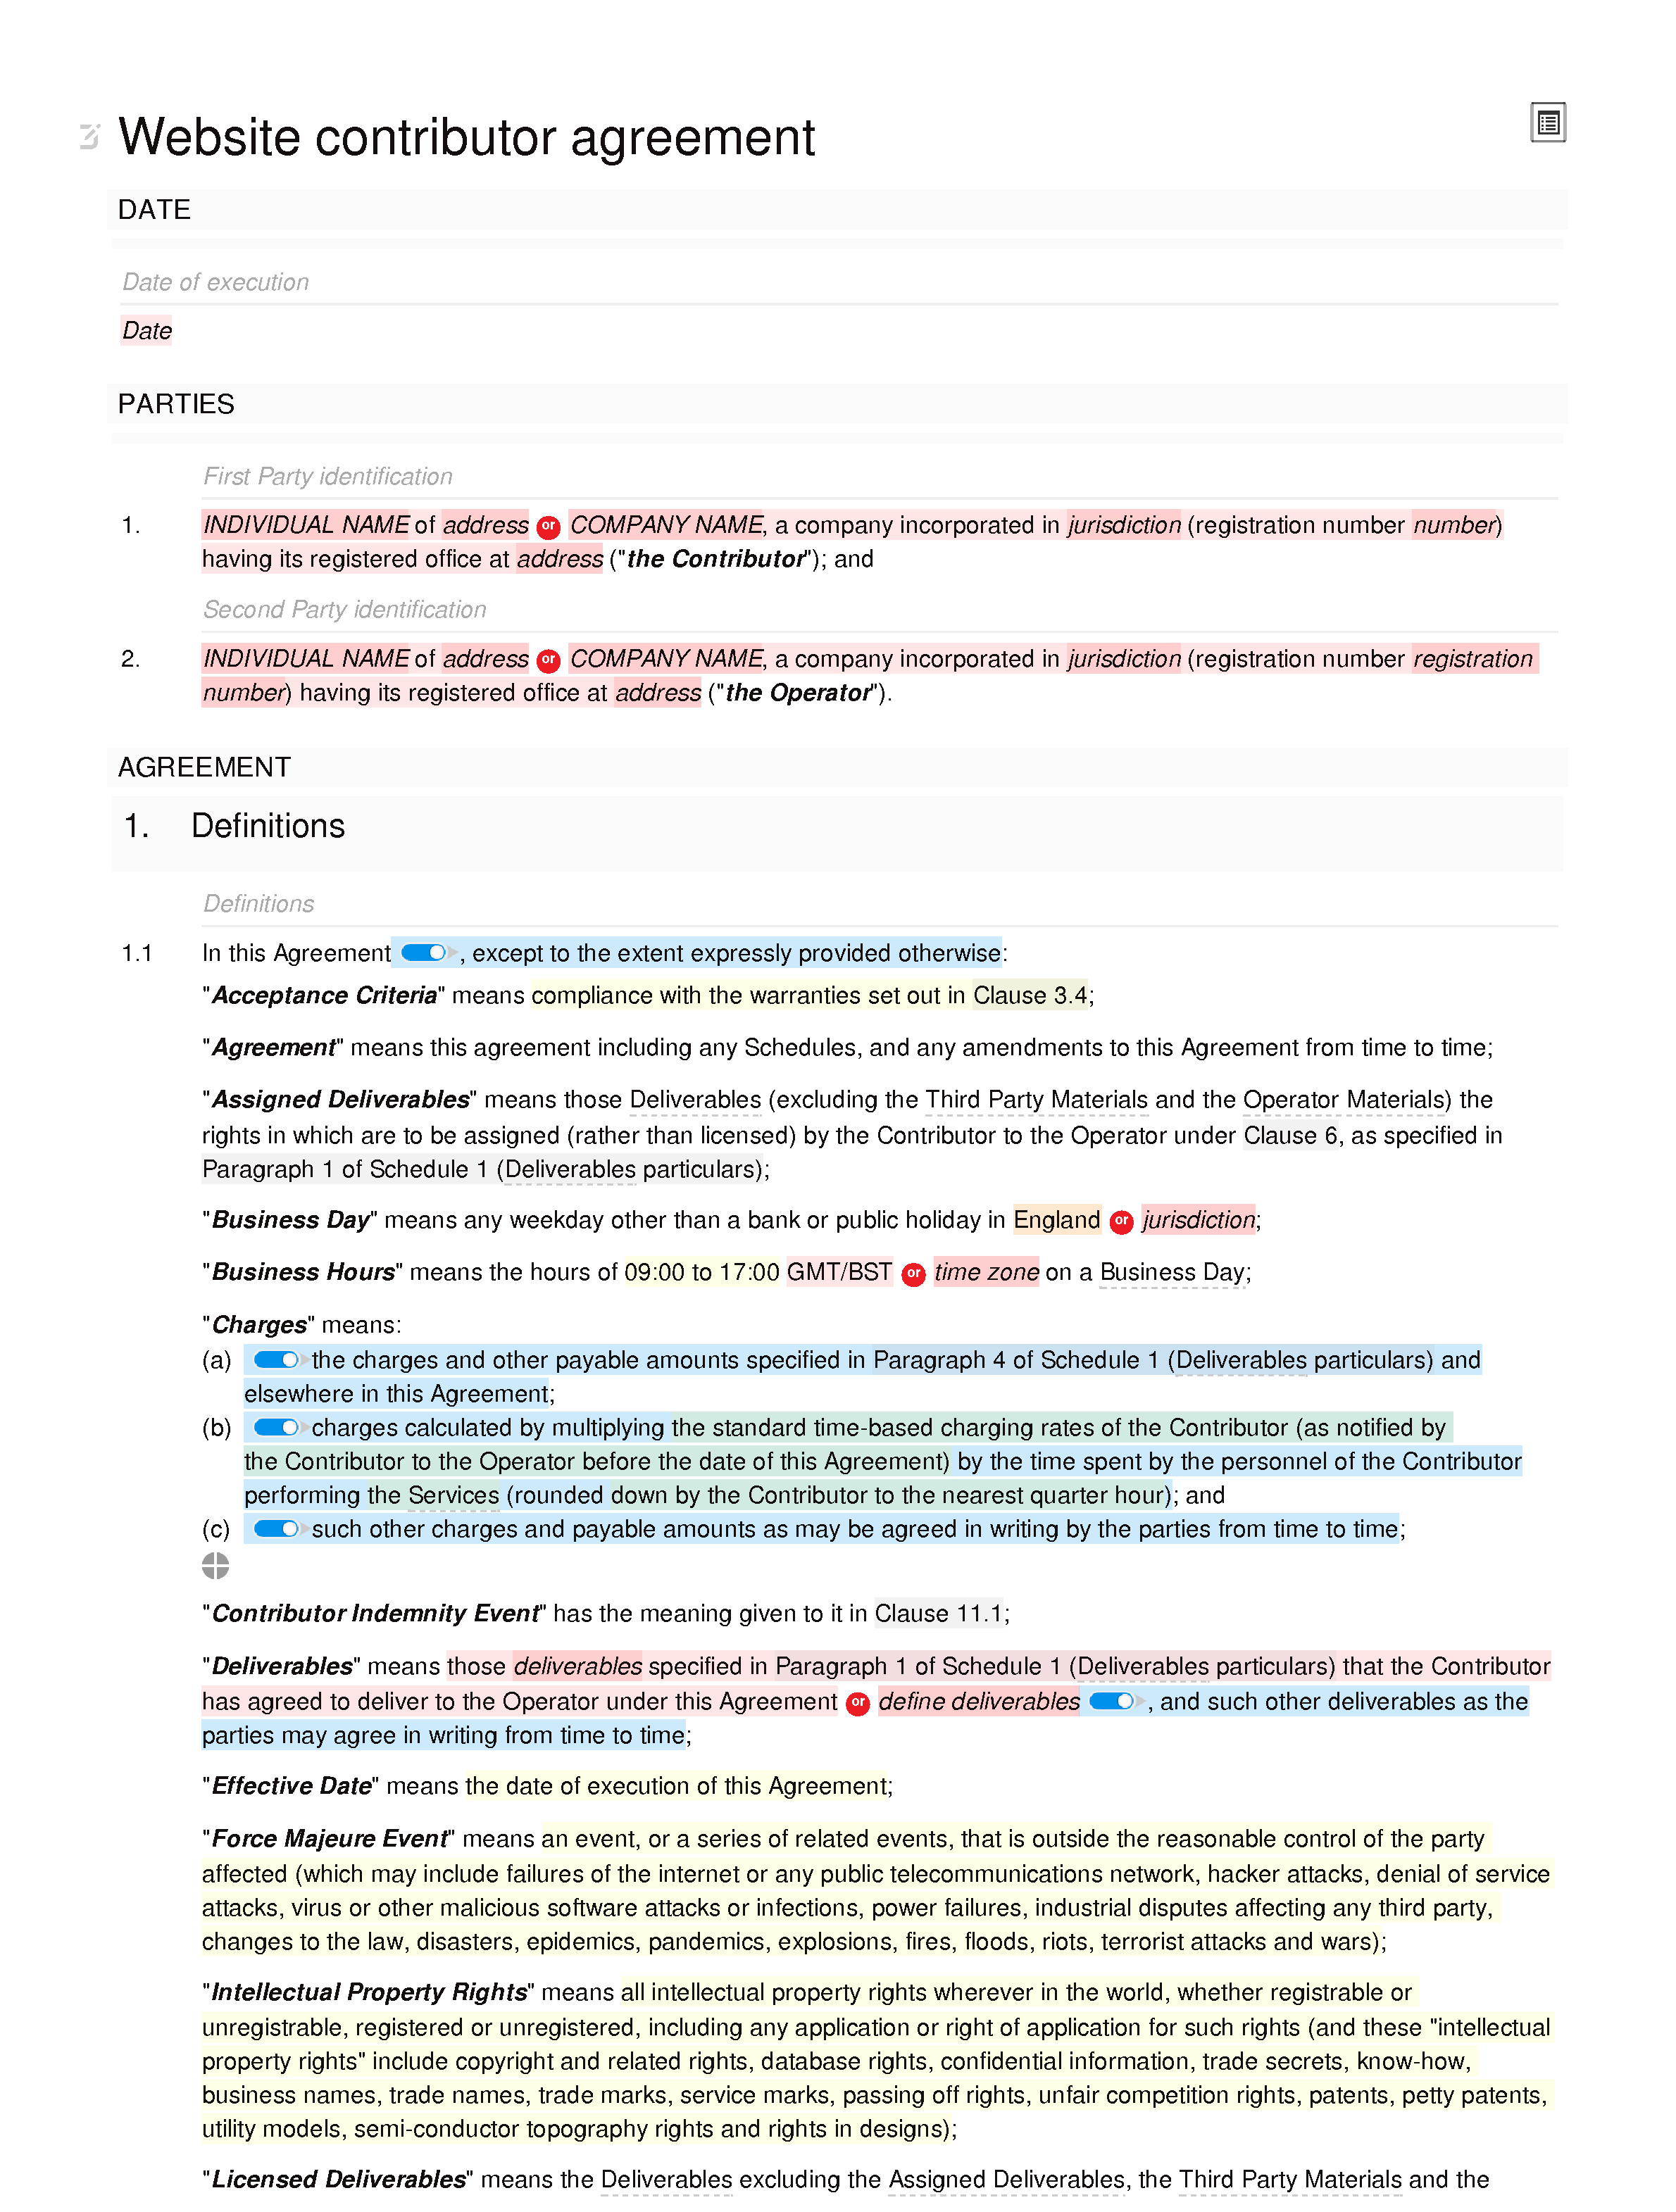 Website contributor agreement (paid) document editor preview